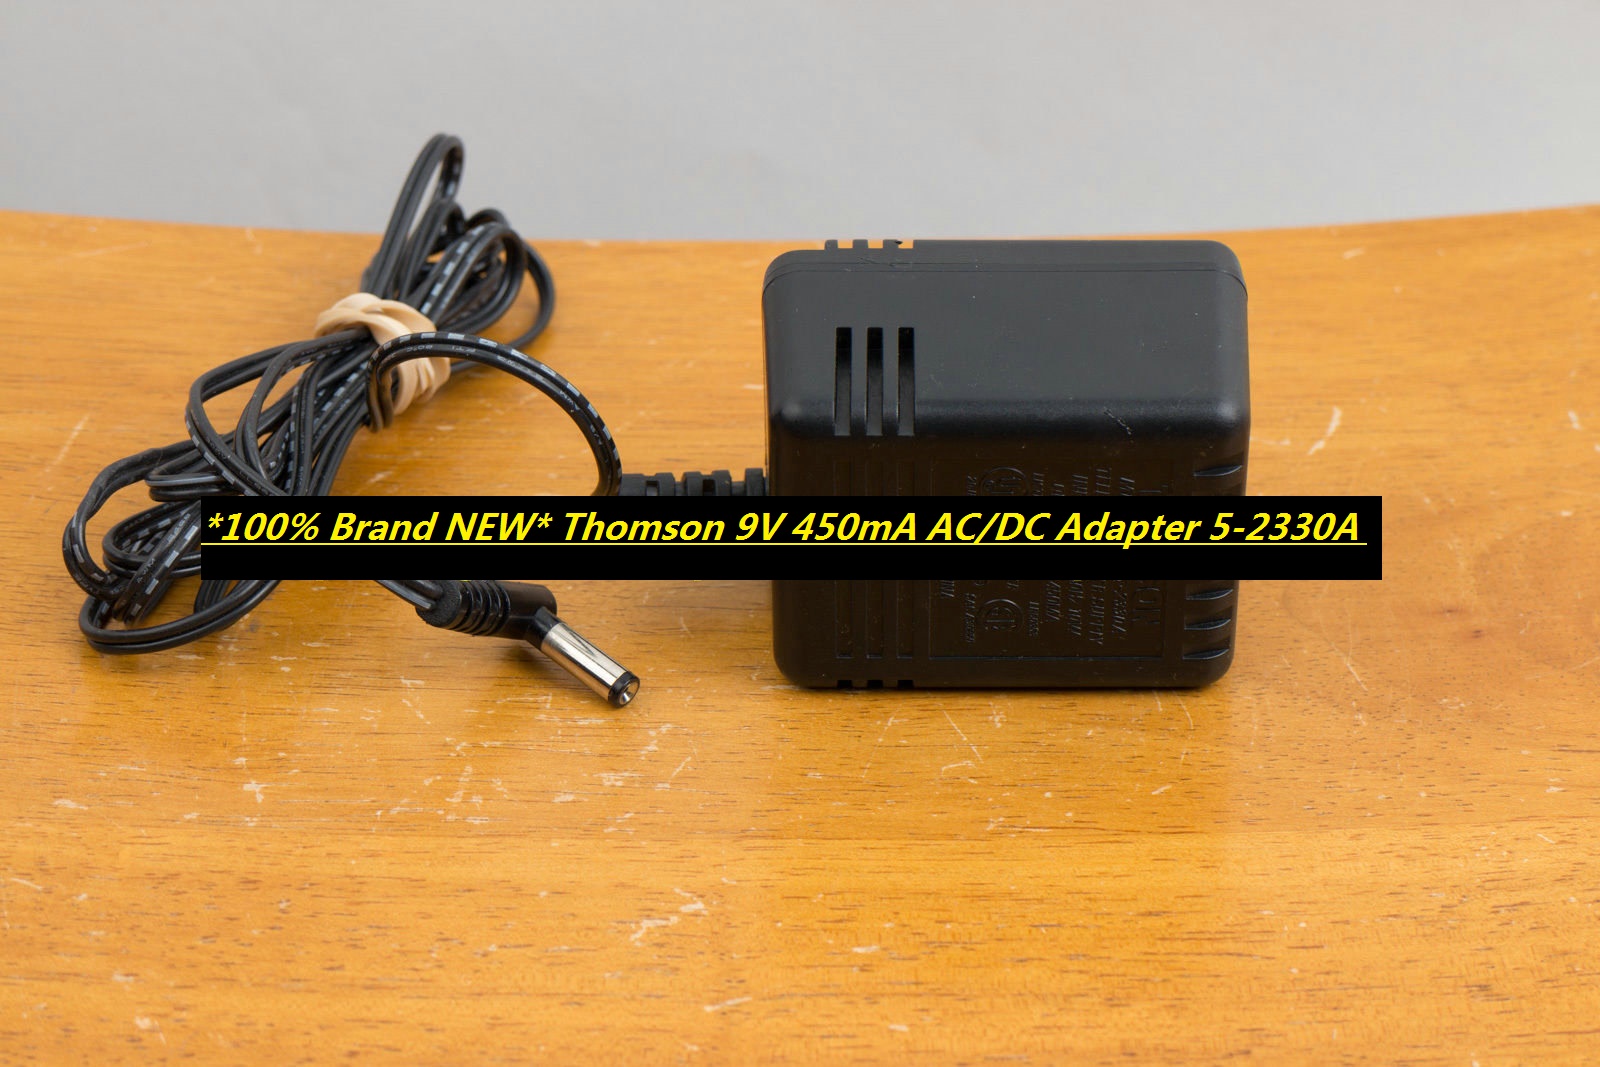 *100% Brand NEW* Thomson 9V 450mA AC/DC Adapter 5-2330A Power Supply